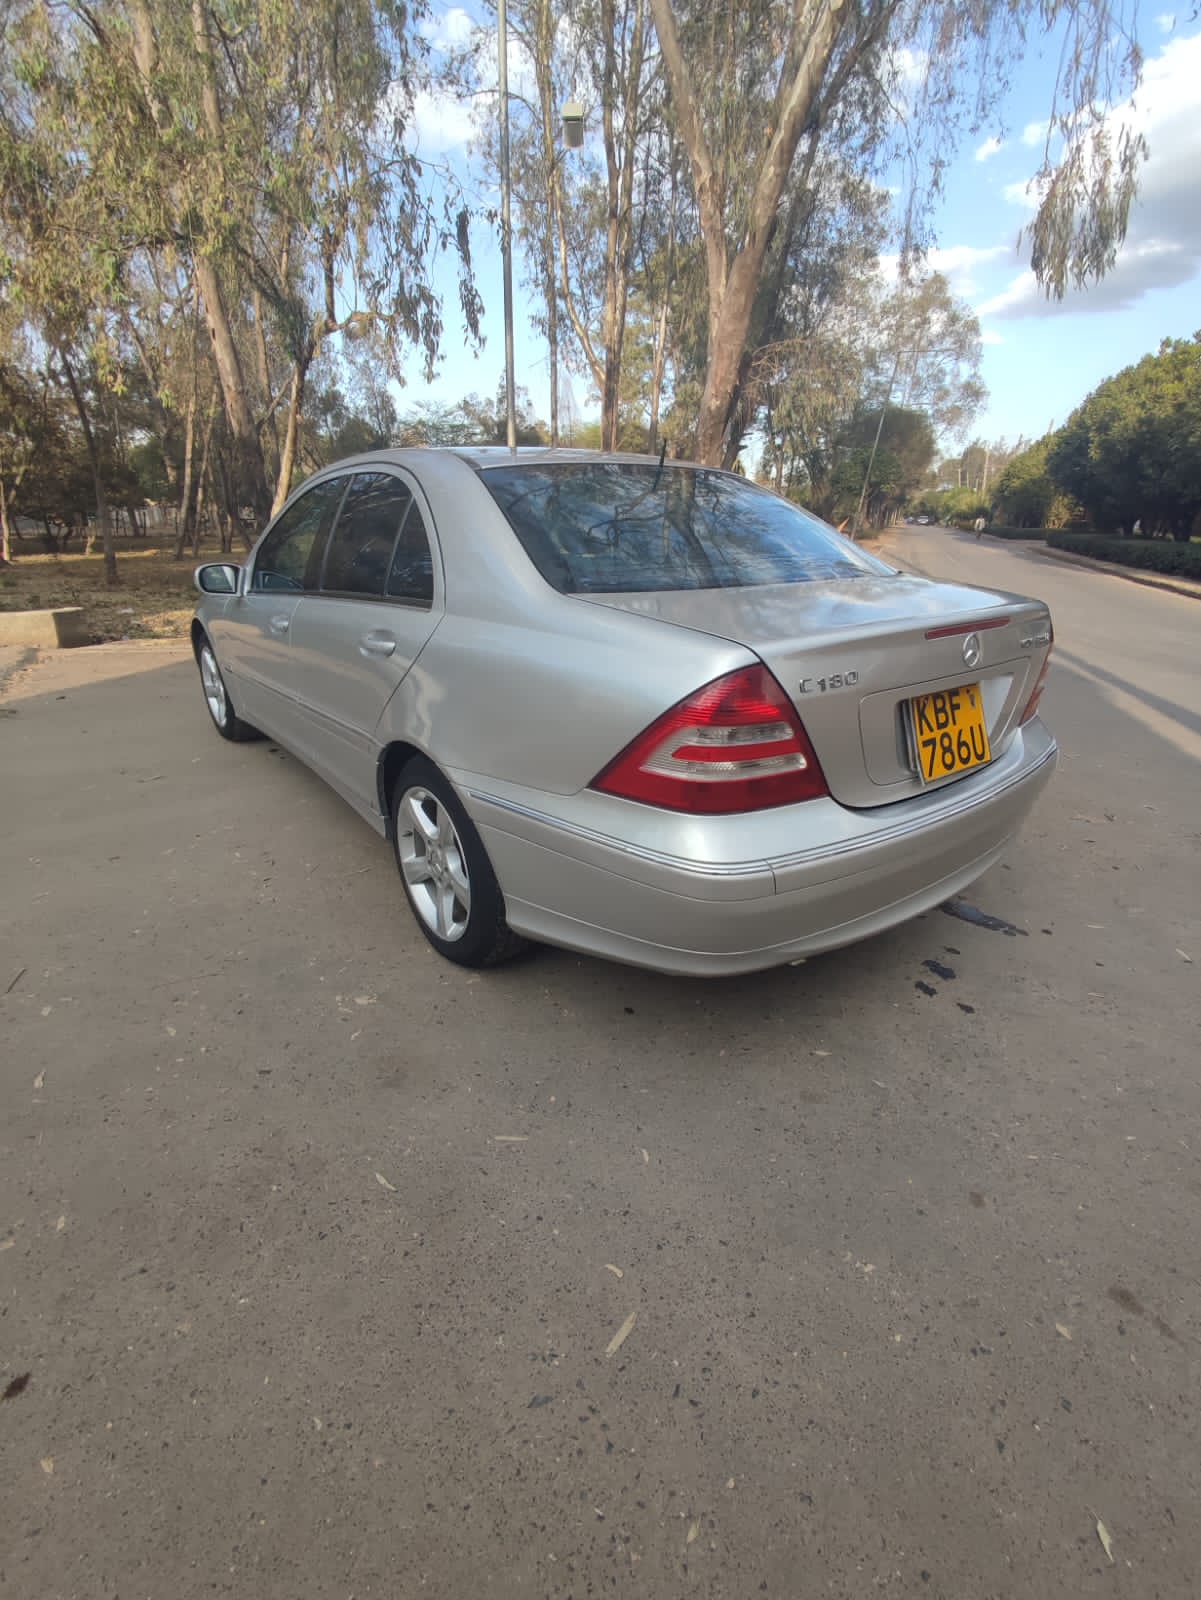 Mercedes Benz C180 2005 You Pay 30% DEPOSIT Trade in OK